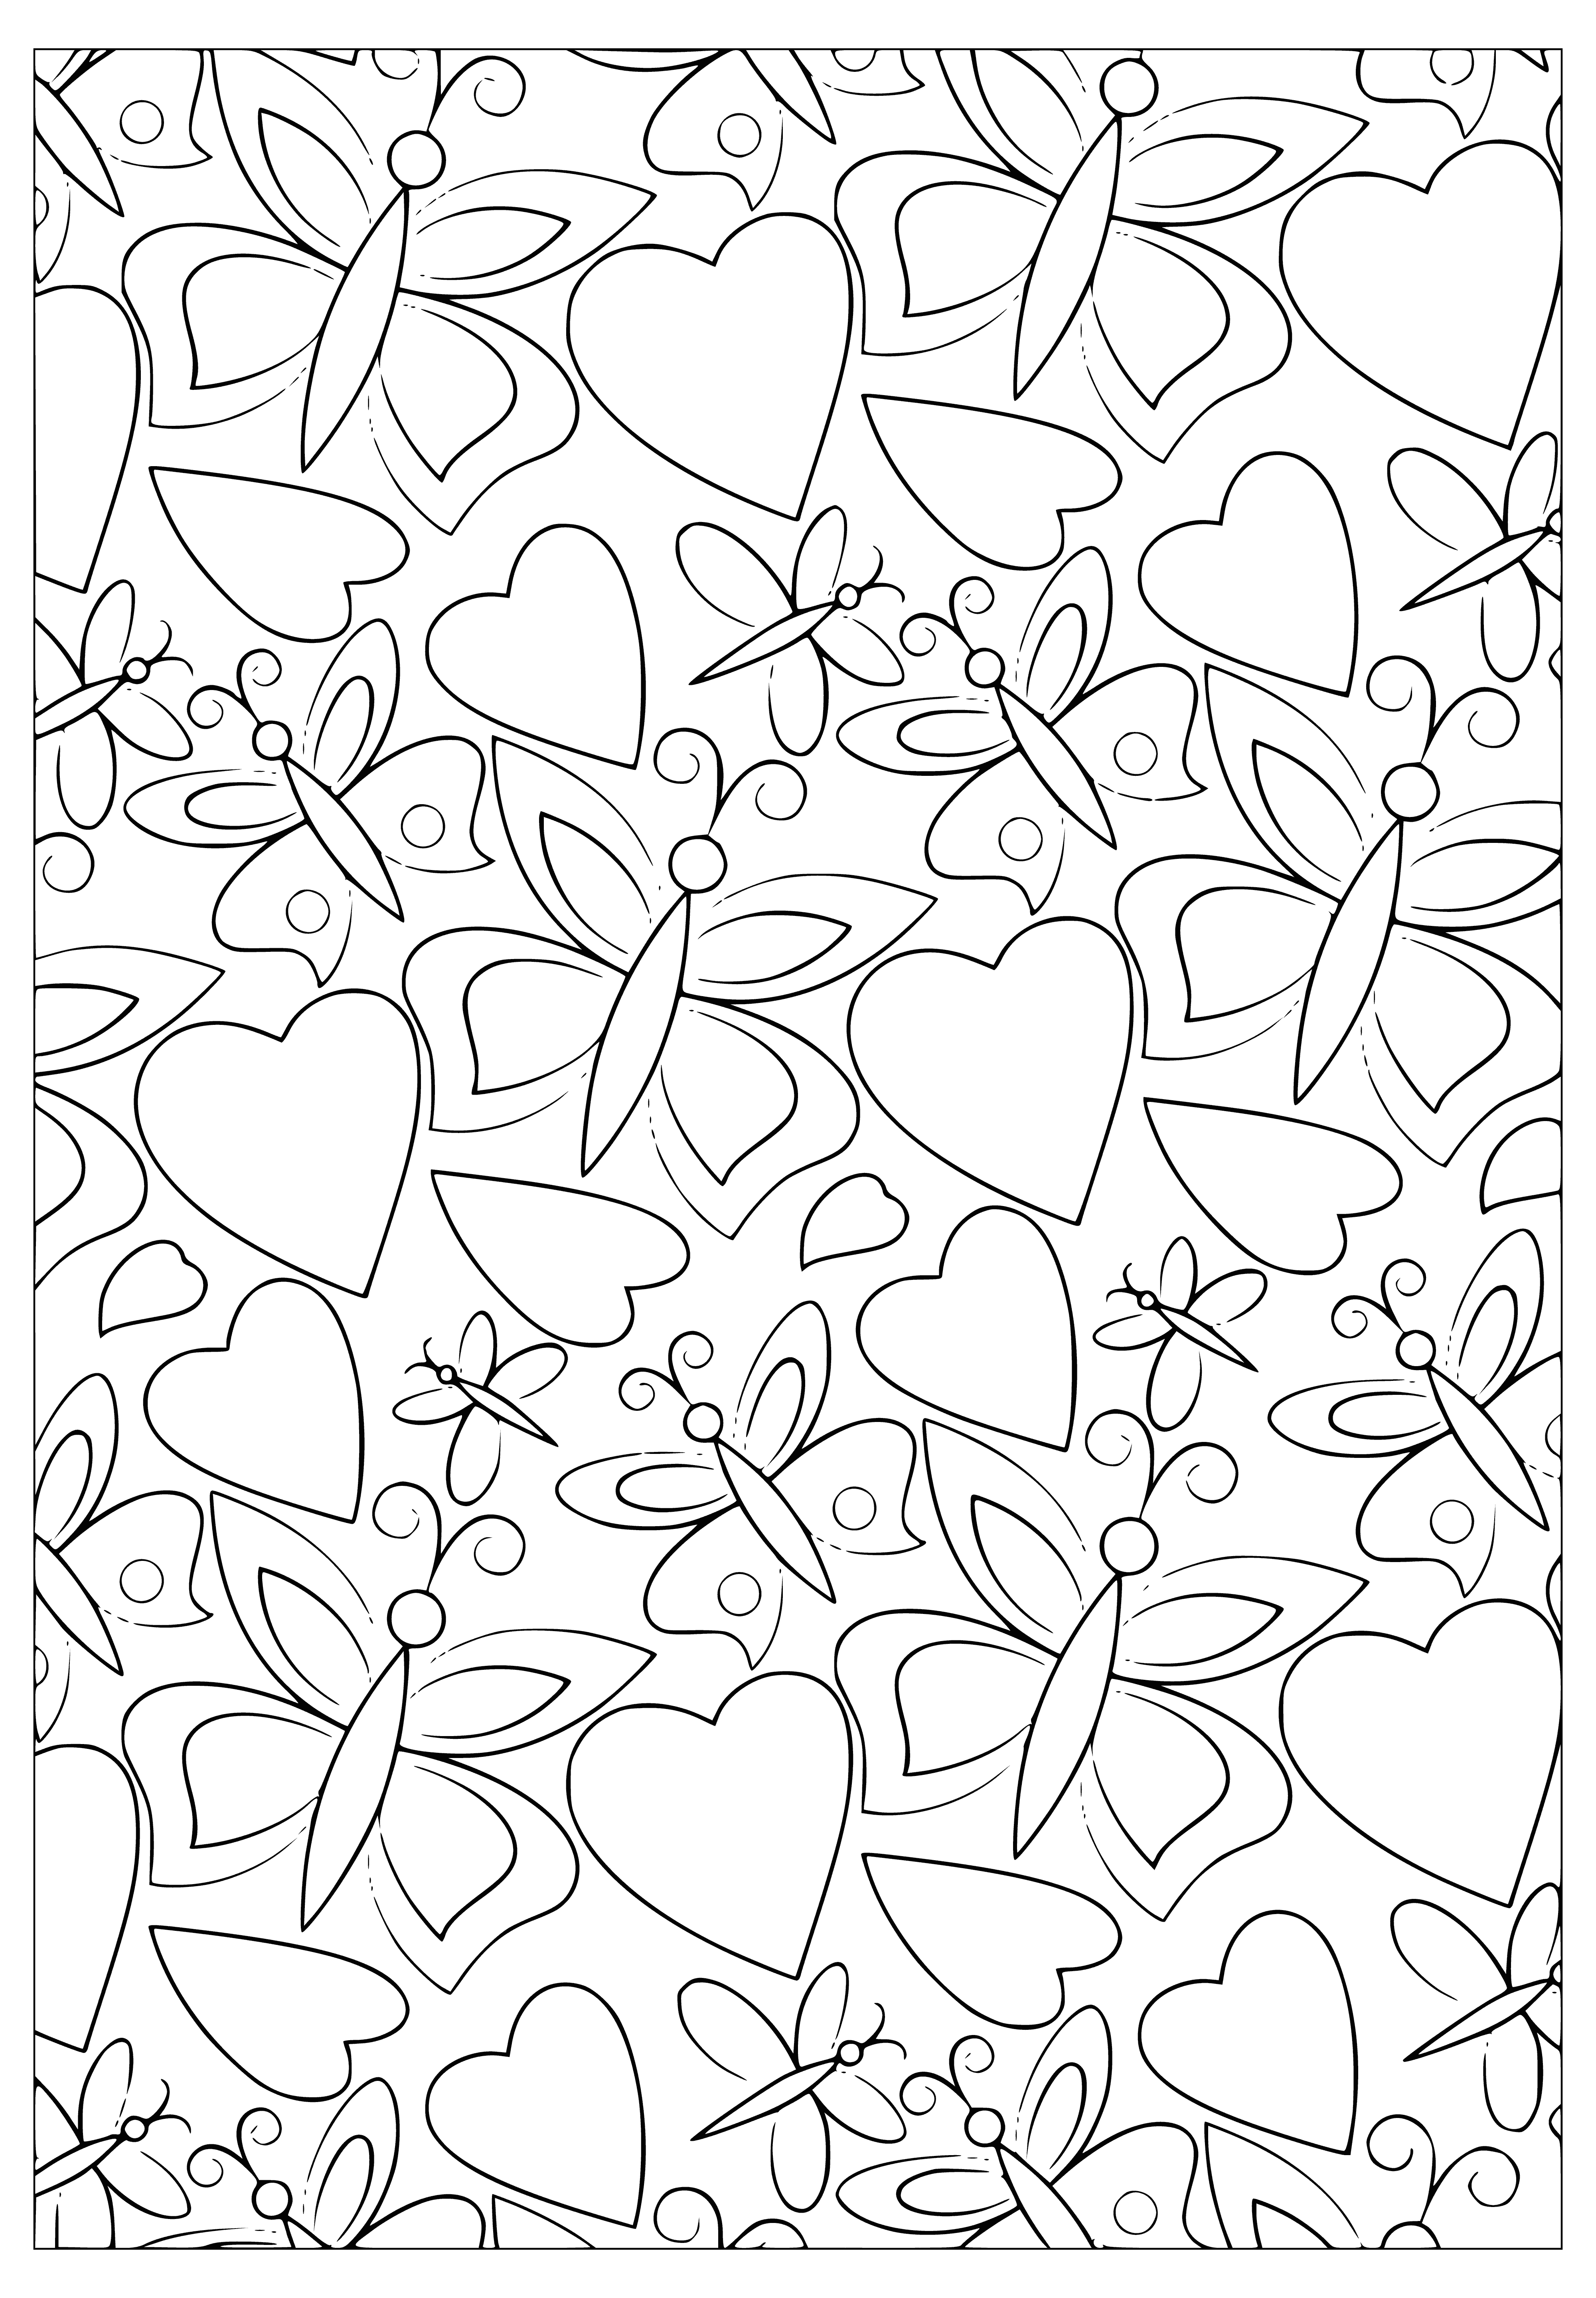 Hearts and butterflies coloring page